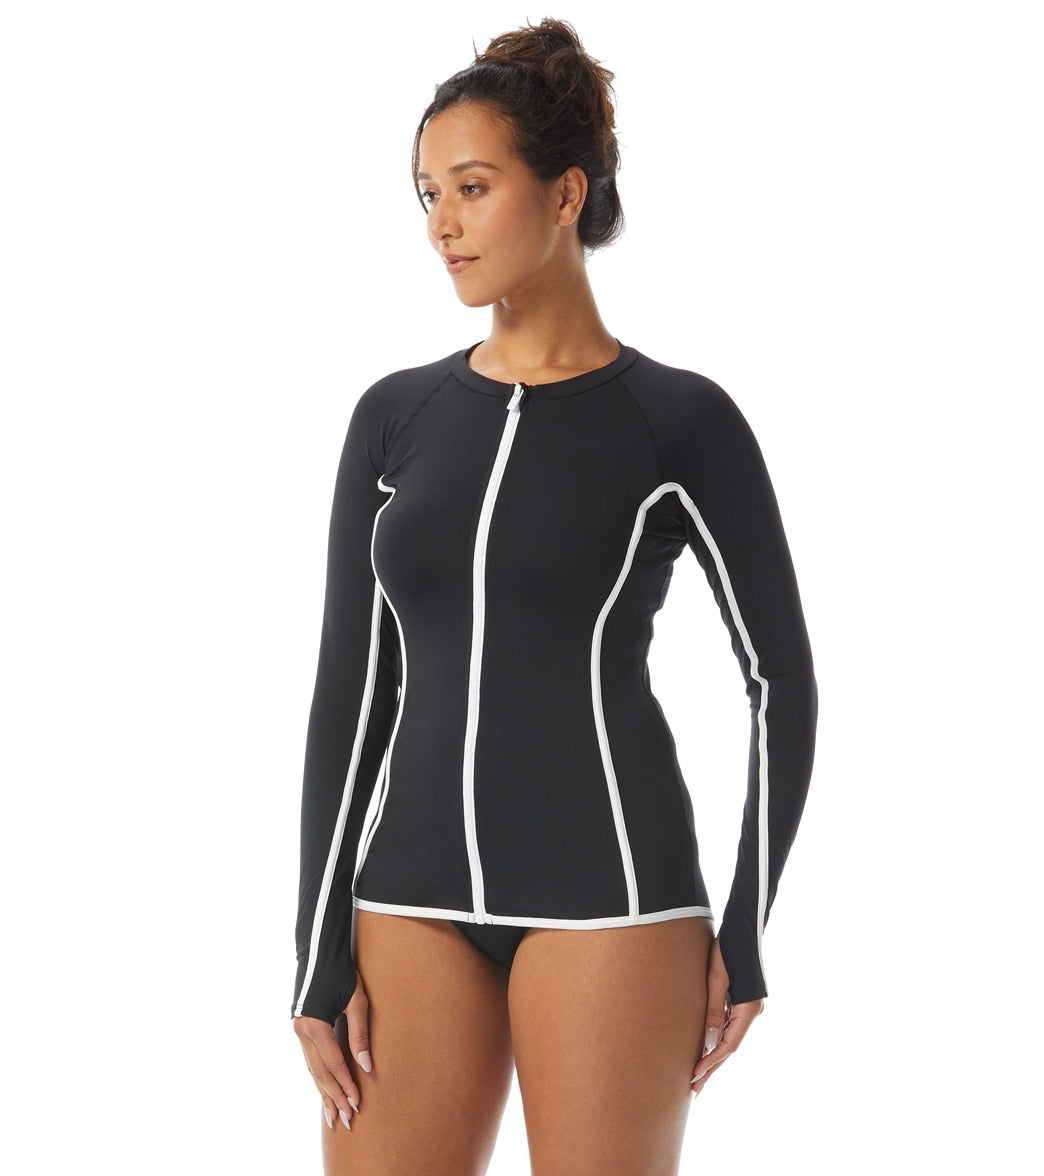 Beach House Women's Piping Solid Ava Zip Front Rash Guard at